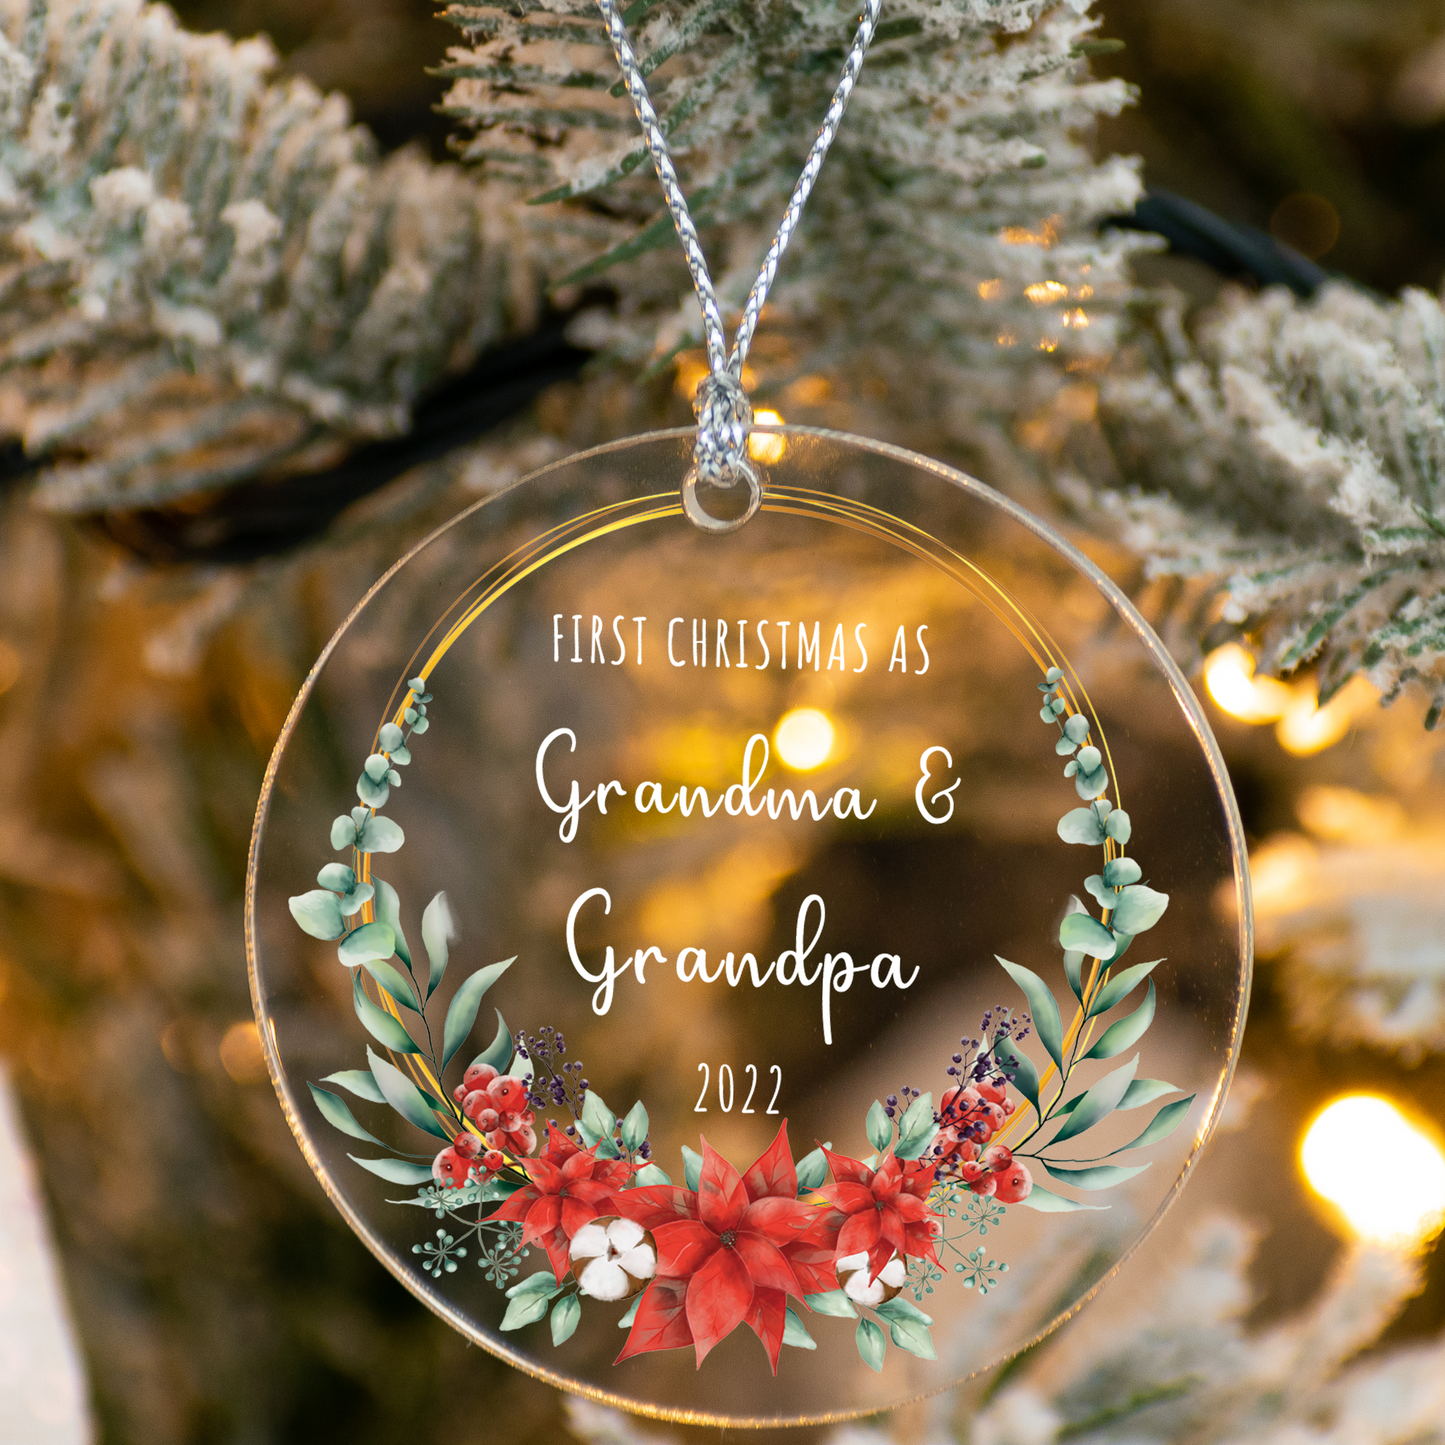 Personalized Ornament Our first Christmas as Grandparents Xmas Keepsake Custom 3.5" Acrylic Family Holiday Christmas Tree Decoration Gift